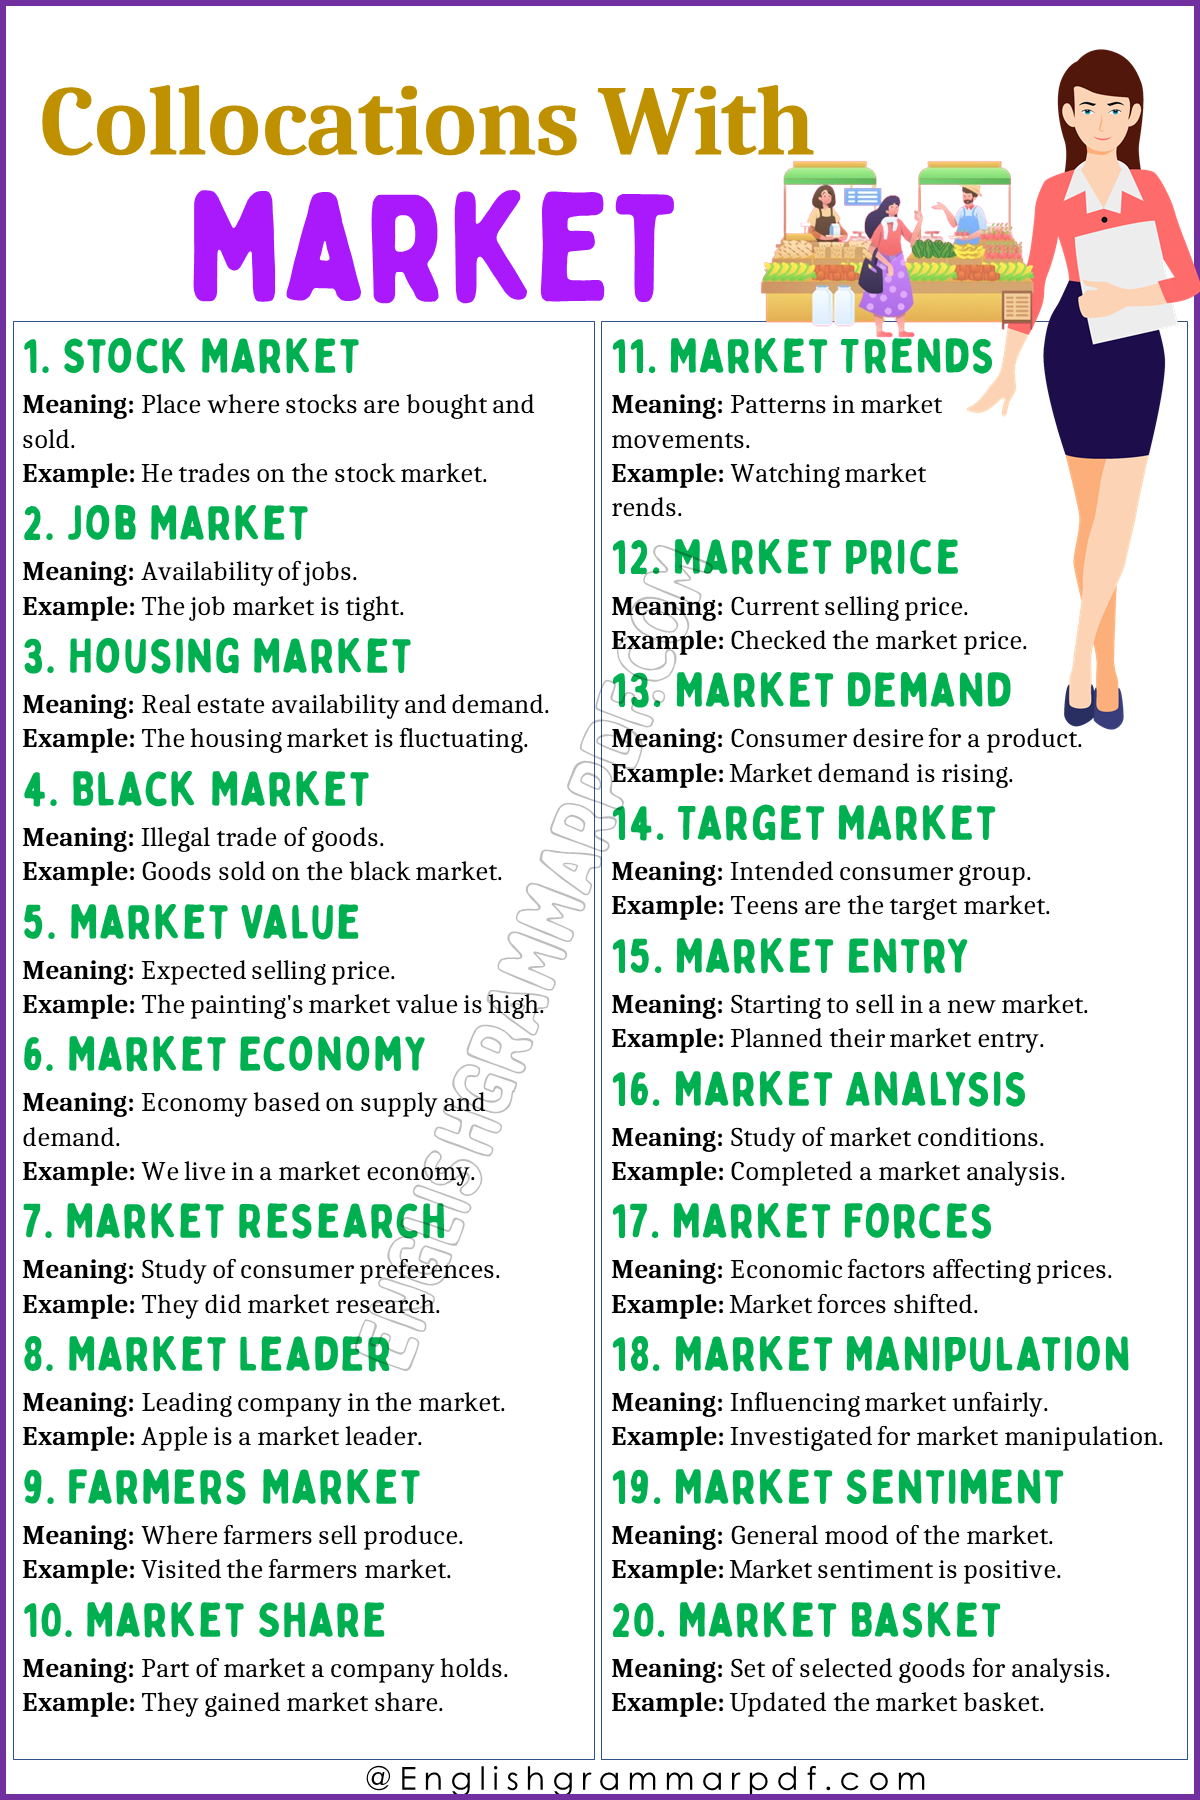 Collocations with Market